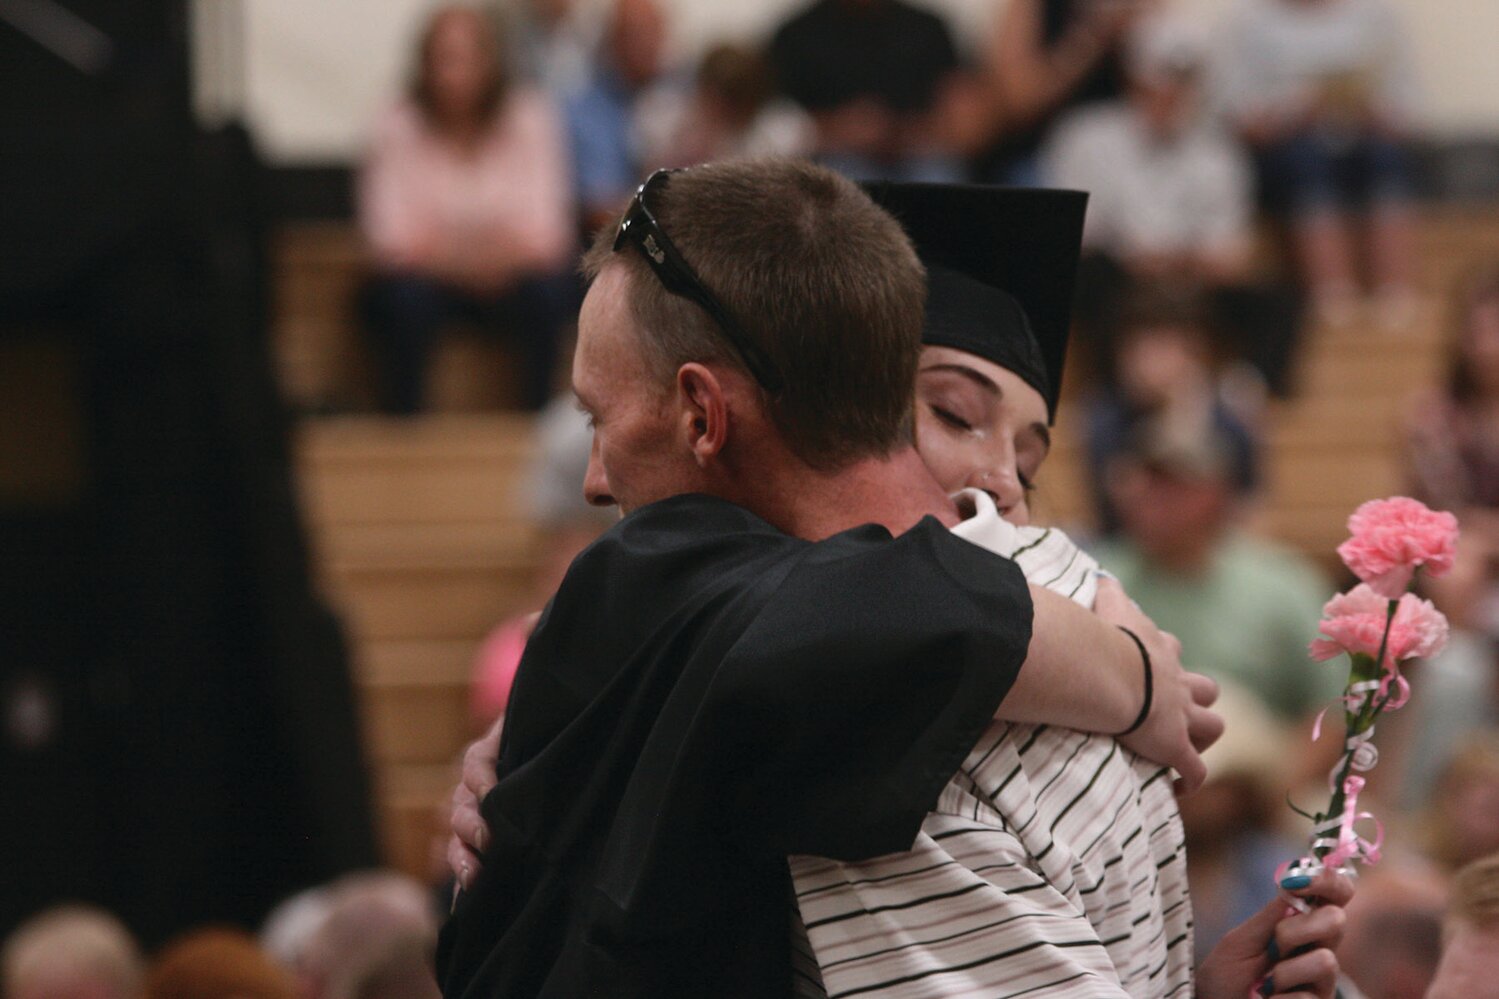 Abi Ogle hugs dad James Ogle and presents him with a carnation during Cairo’s commencement exercise May 14.